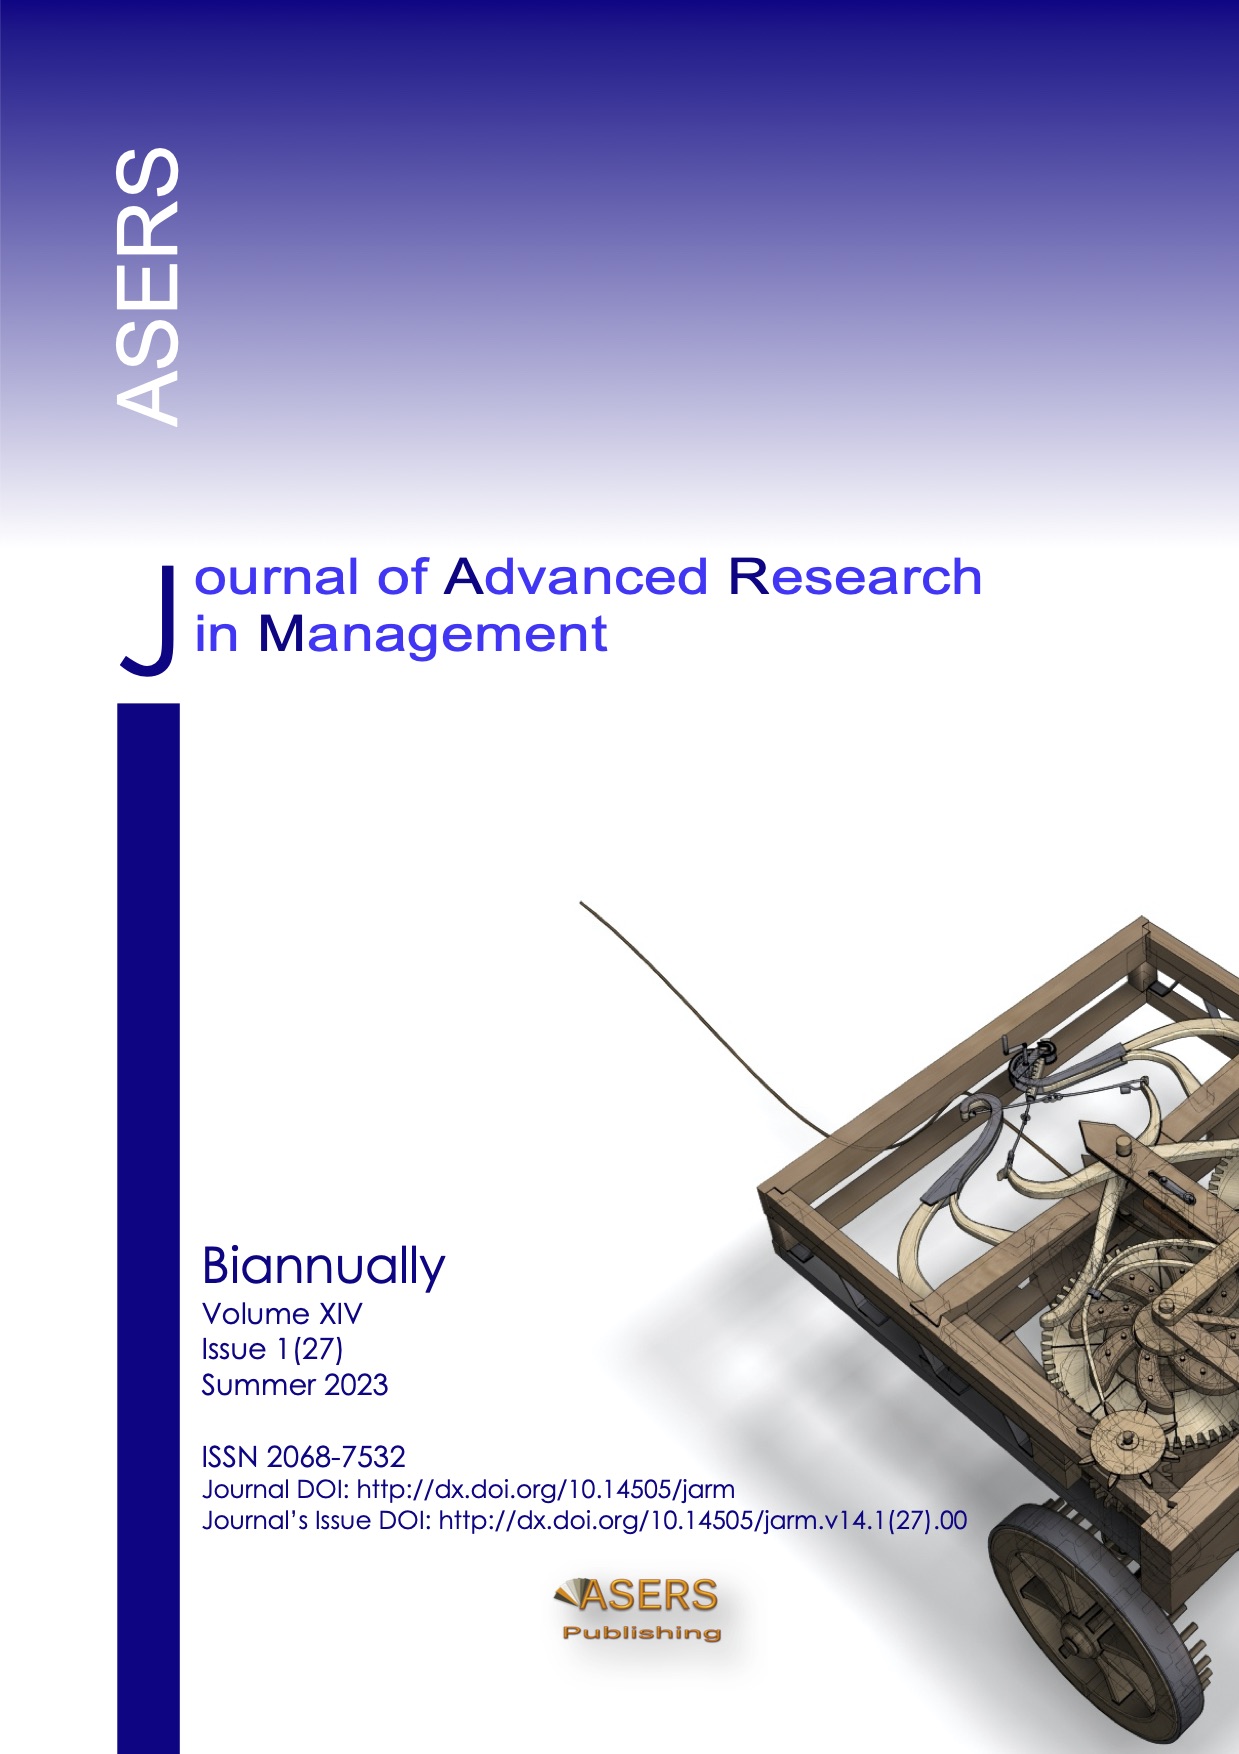 Journal of Advanced Research in Management (JARM)